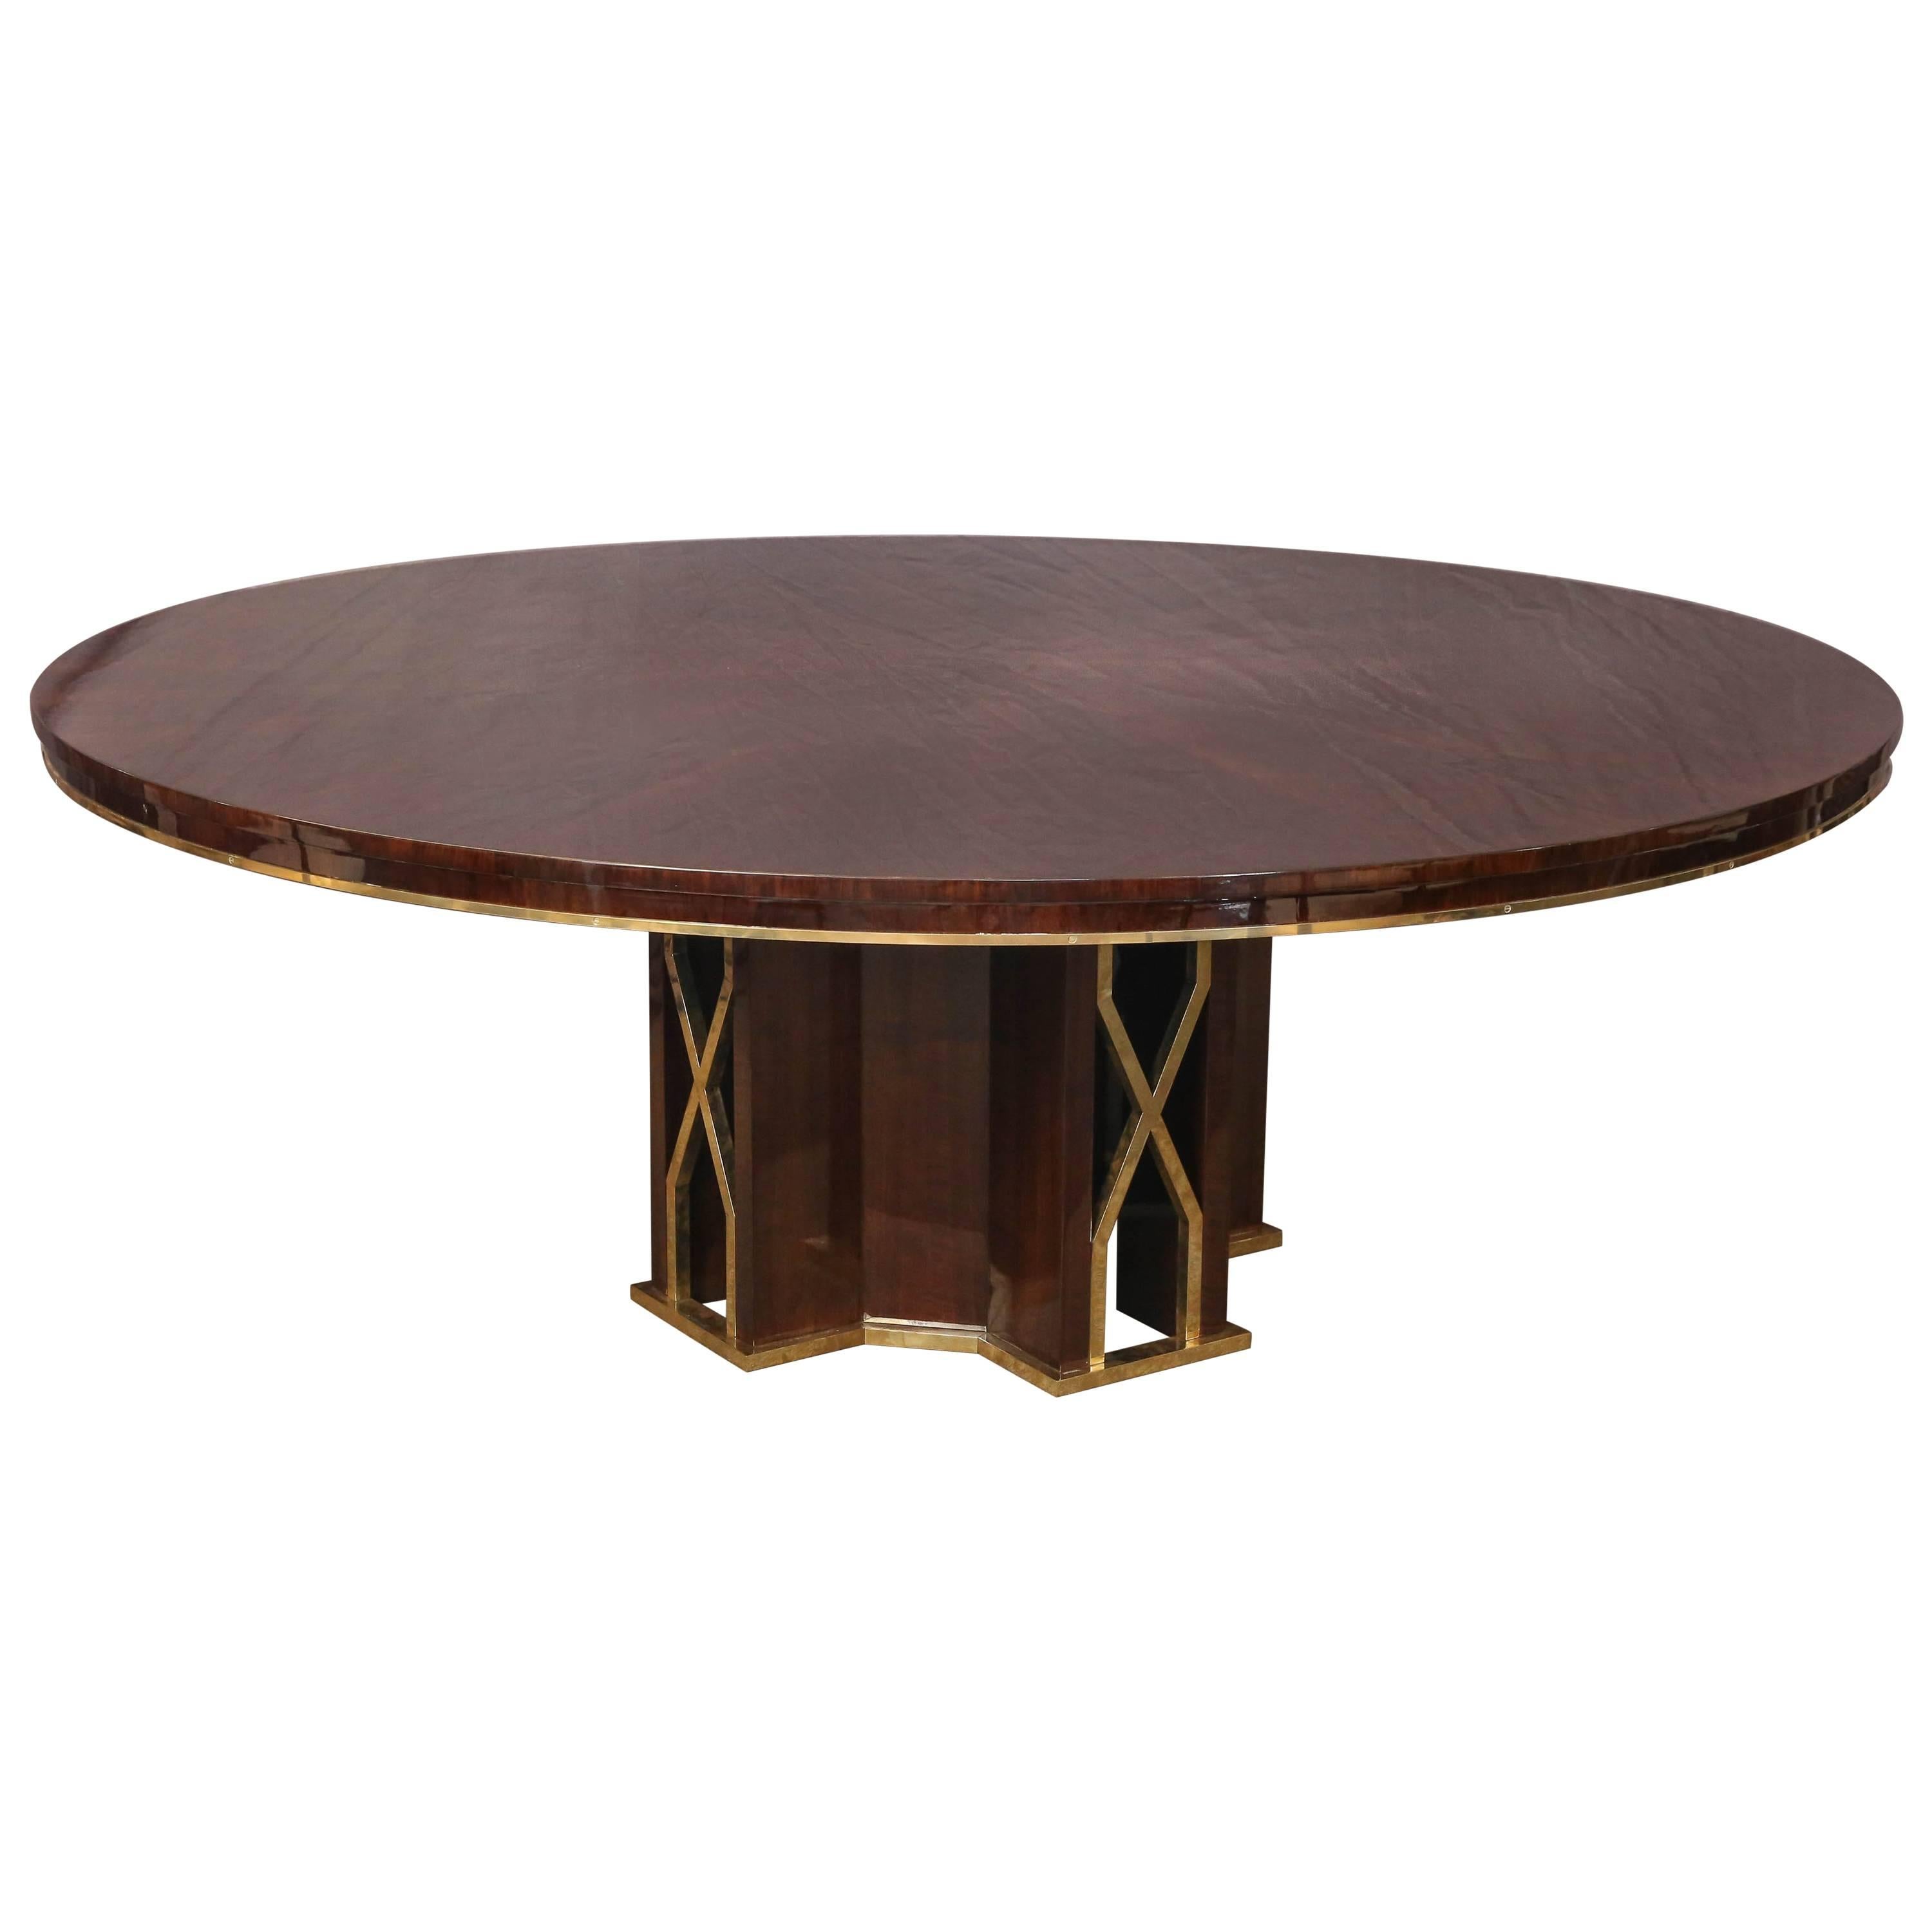 Midcentury Round Dining Room Table in Walnut